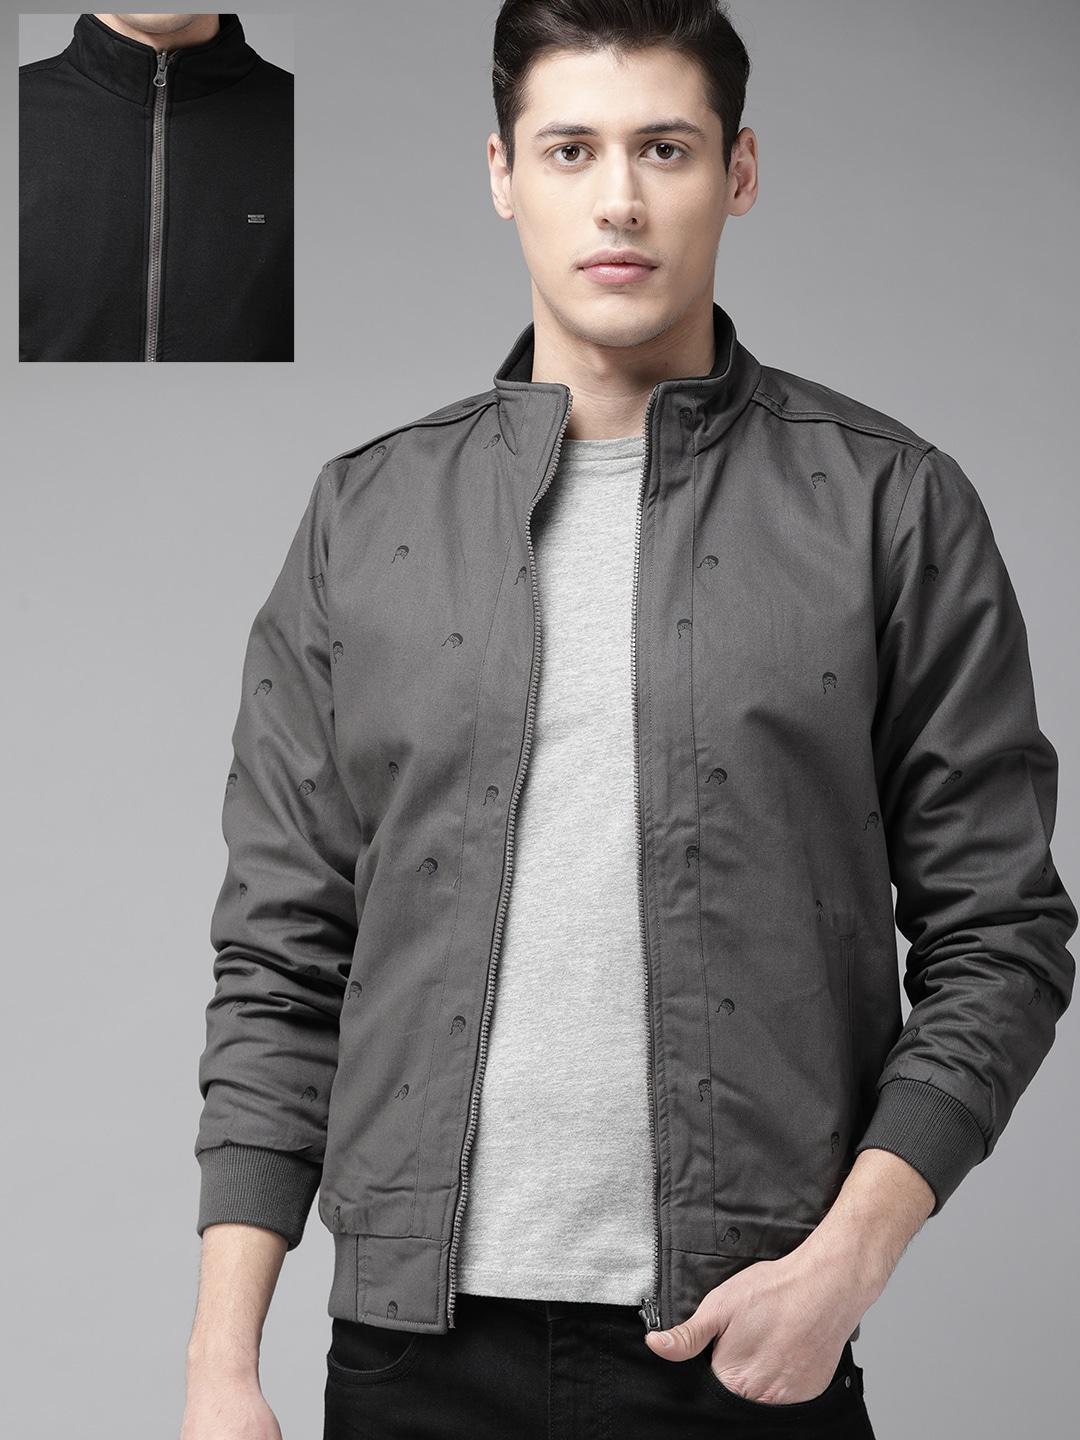 the-roadster-lifestyle-co-men-charcoal-grey-&-black-printed-reversible-bomber-jacket